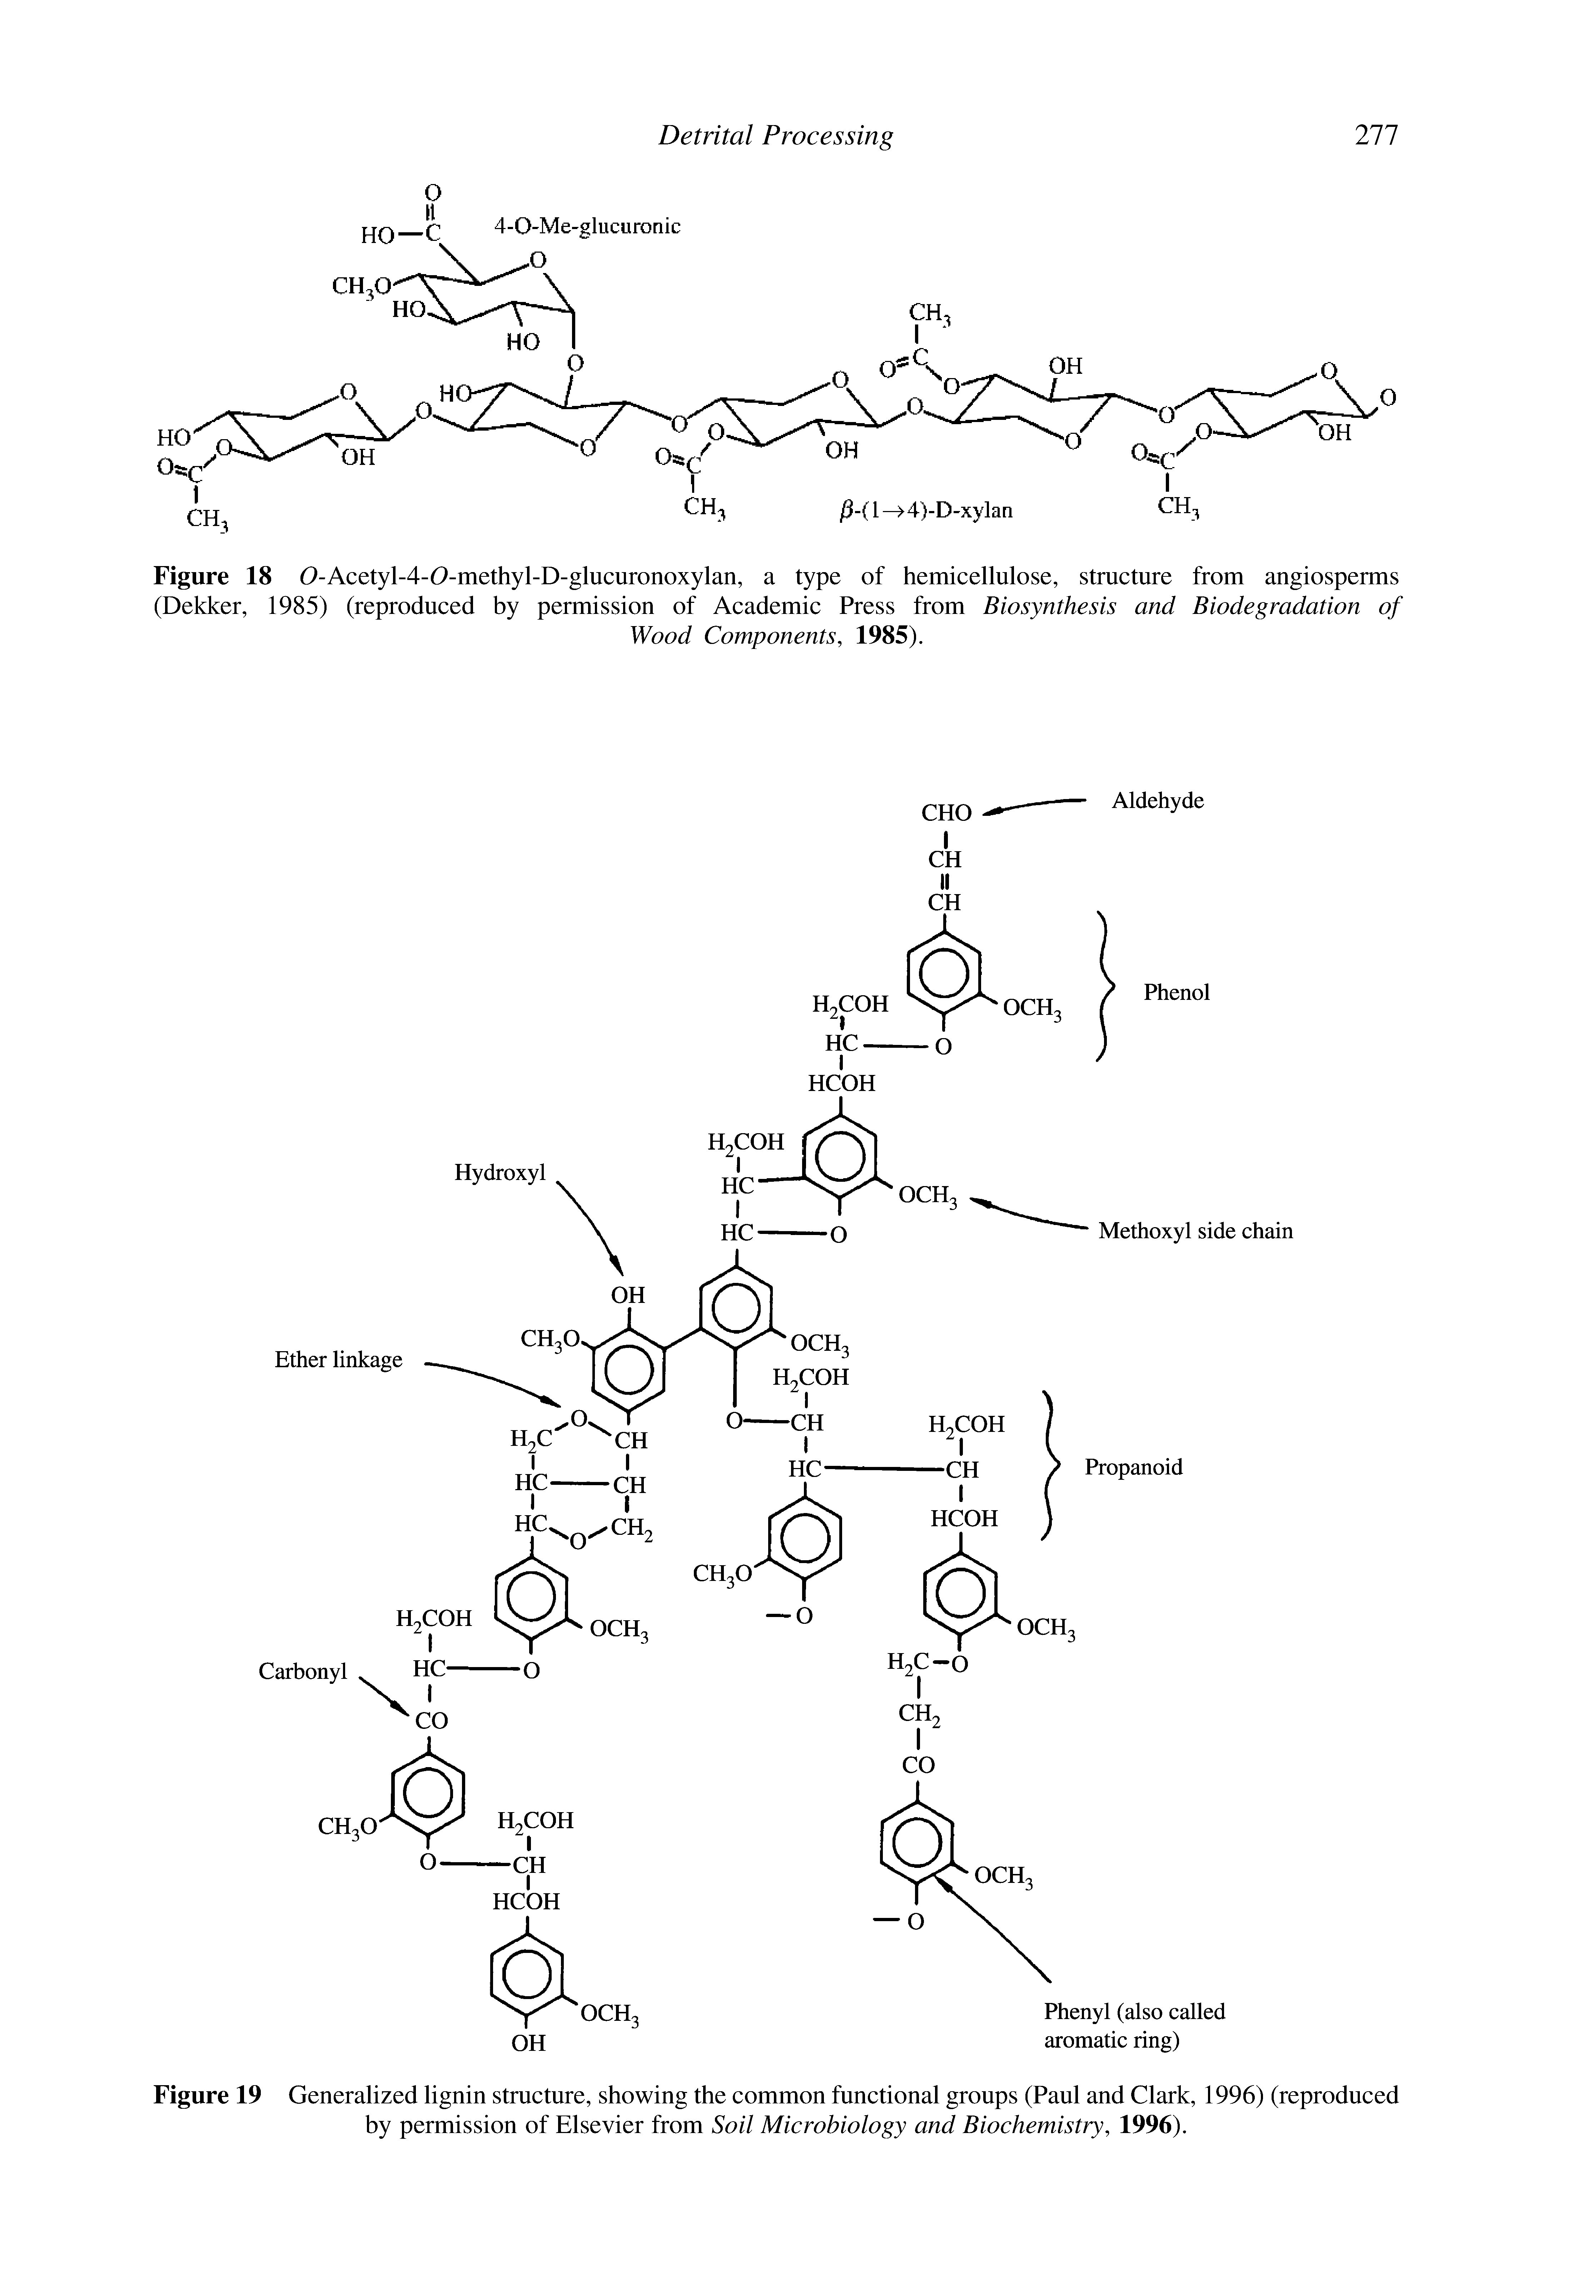 Figure 18 O-Acetyl-4-O-methyl-D-glucuronoxylan, a type of hemicellulose, structure from angiosperms (Dekker, 1985) (reproduced by permission of Academic Press from Biosynthesis and Biodegradation of...